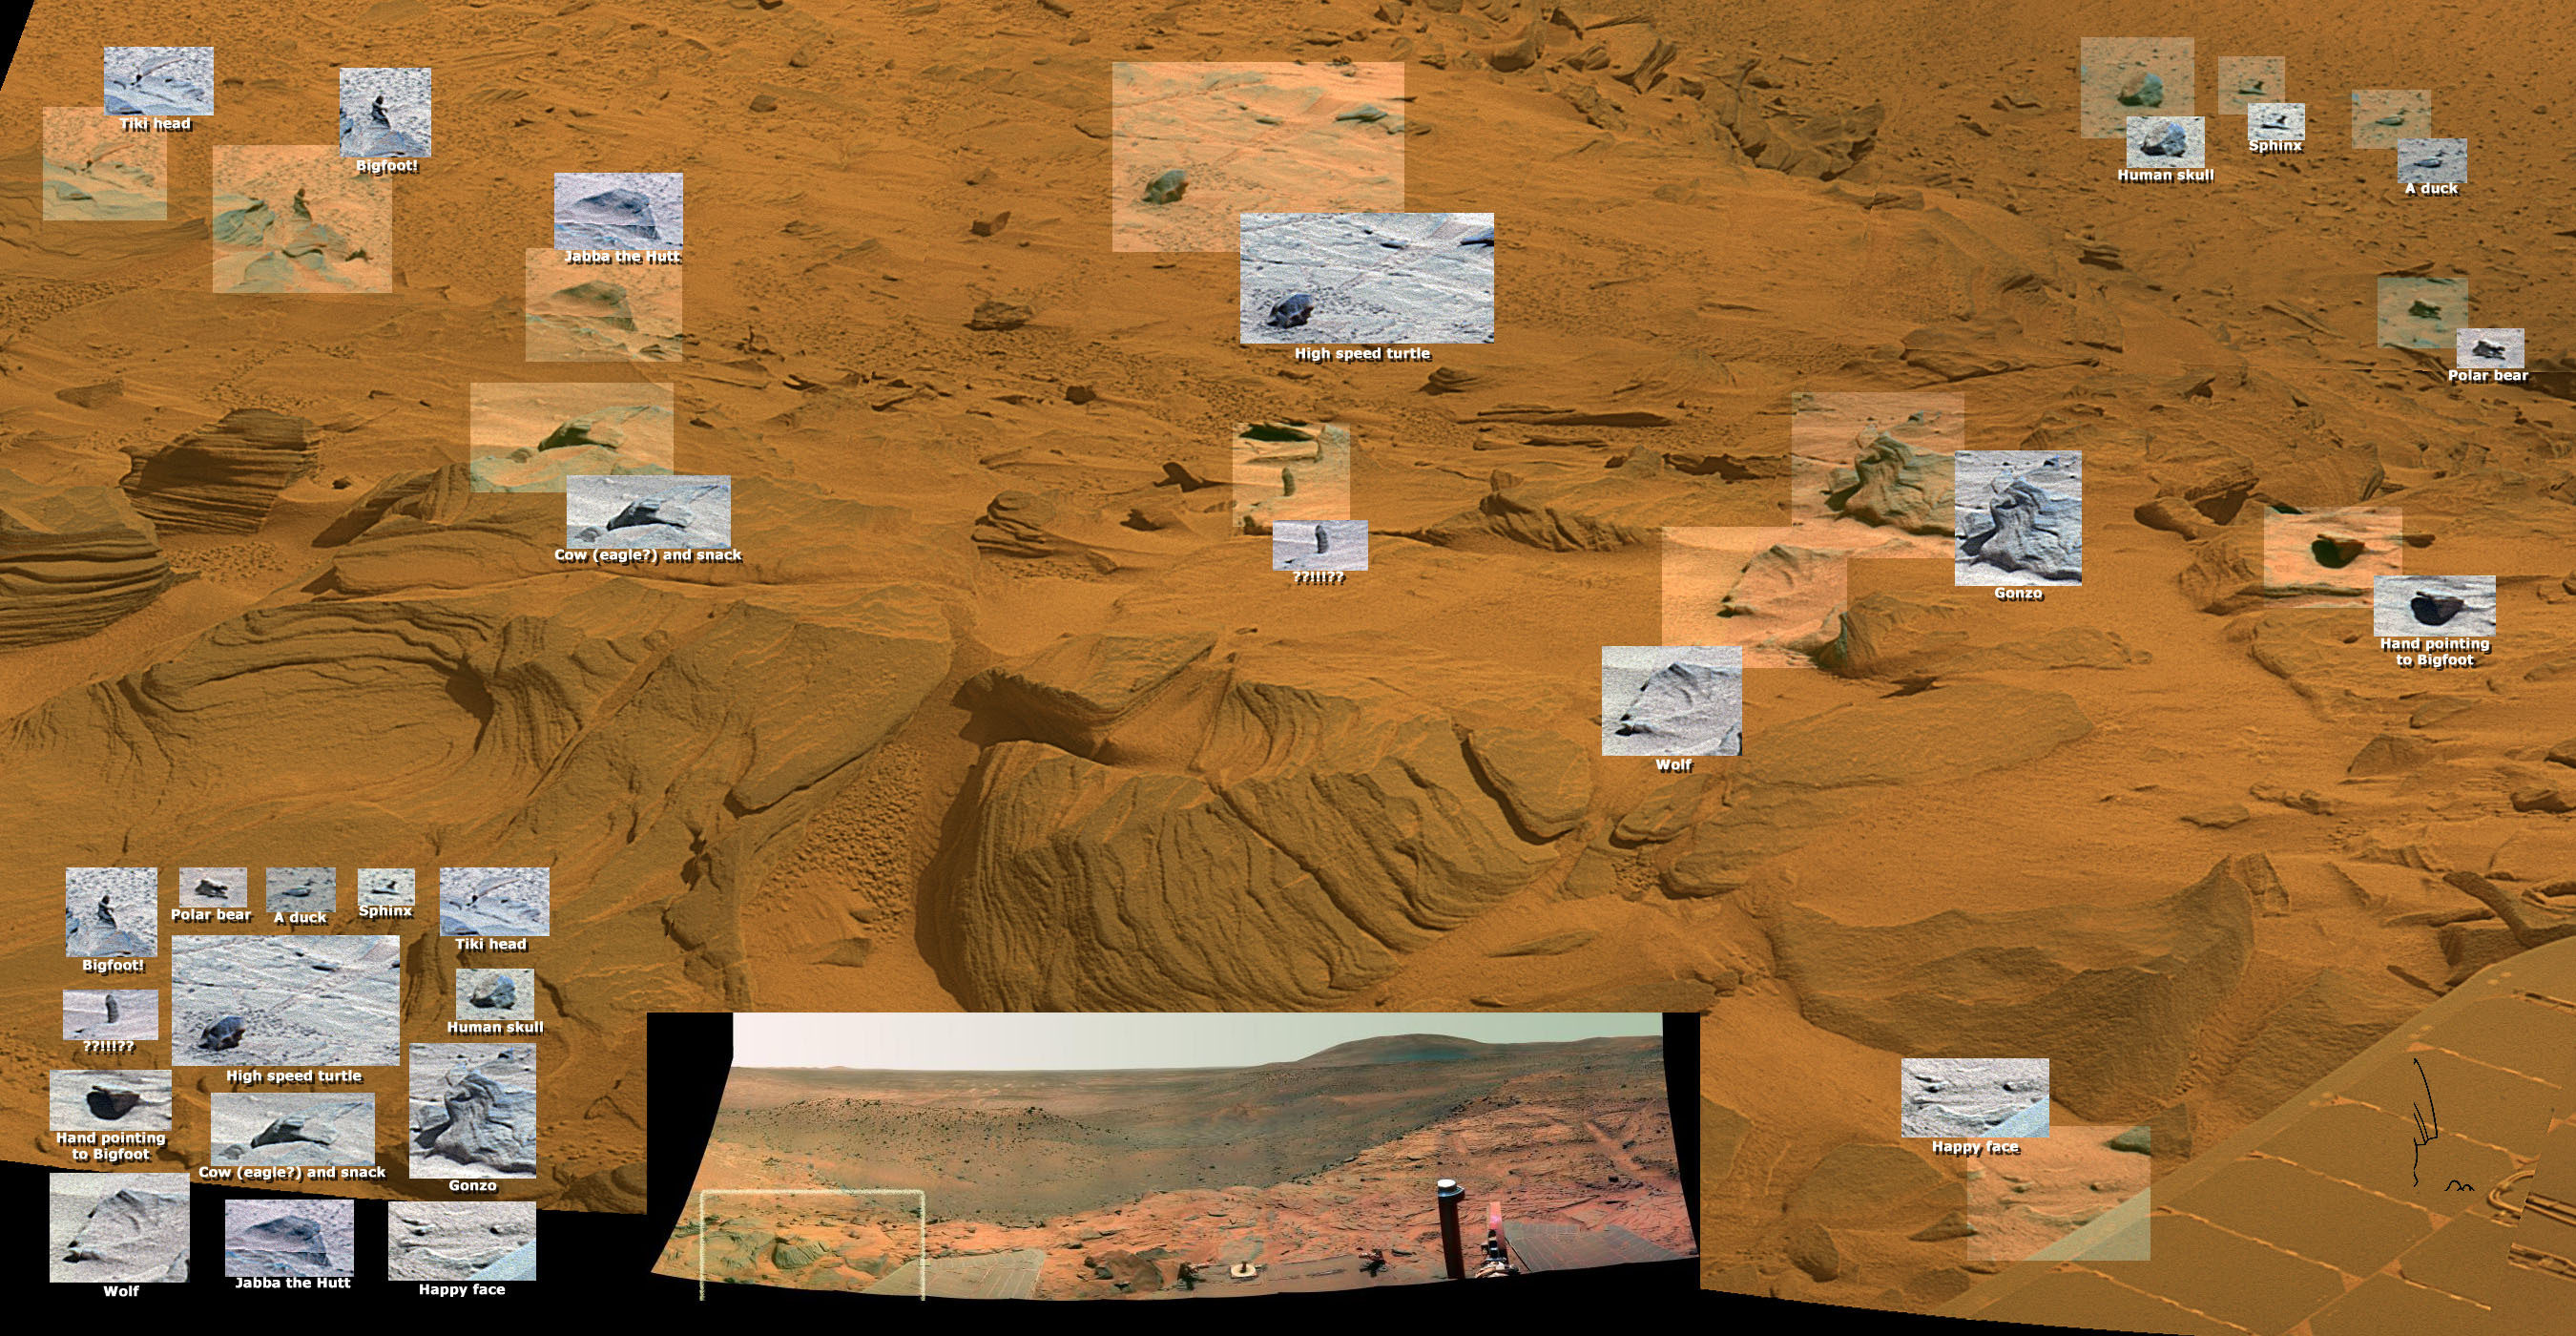 Big Foot and Friends. Just about everywhere you look on Mars there seems to be something that looks like an animal or other more earthly creature feature. Image: NASA/Eric Hartwell